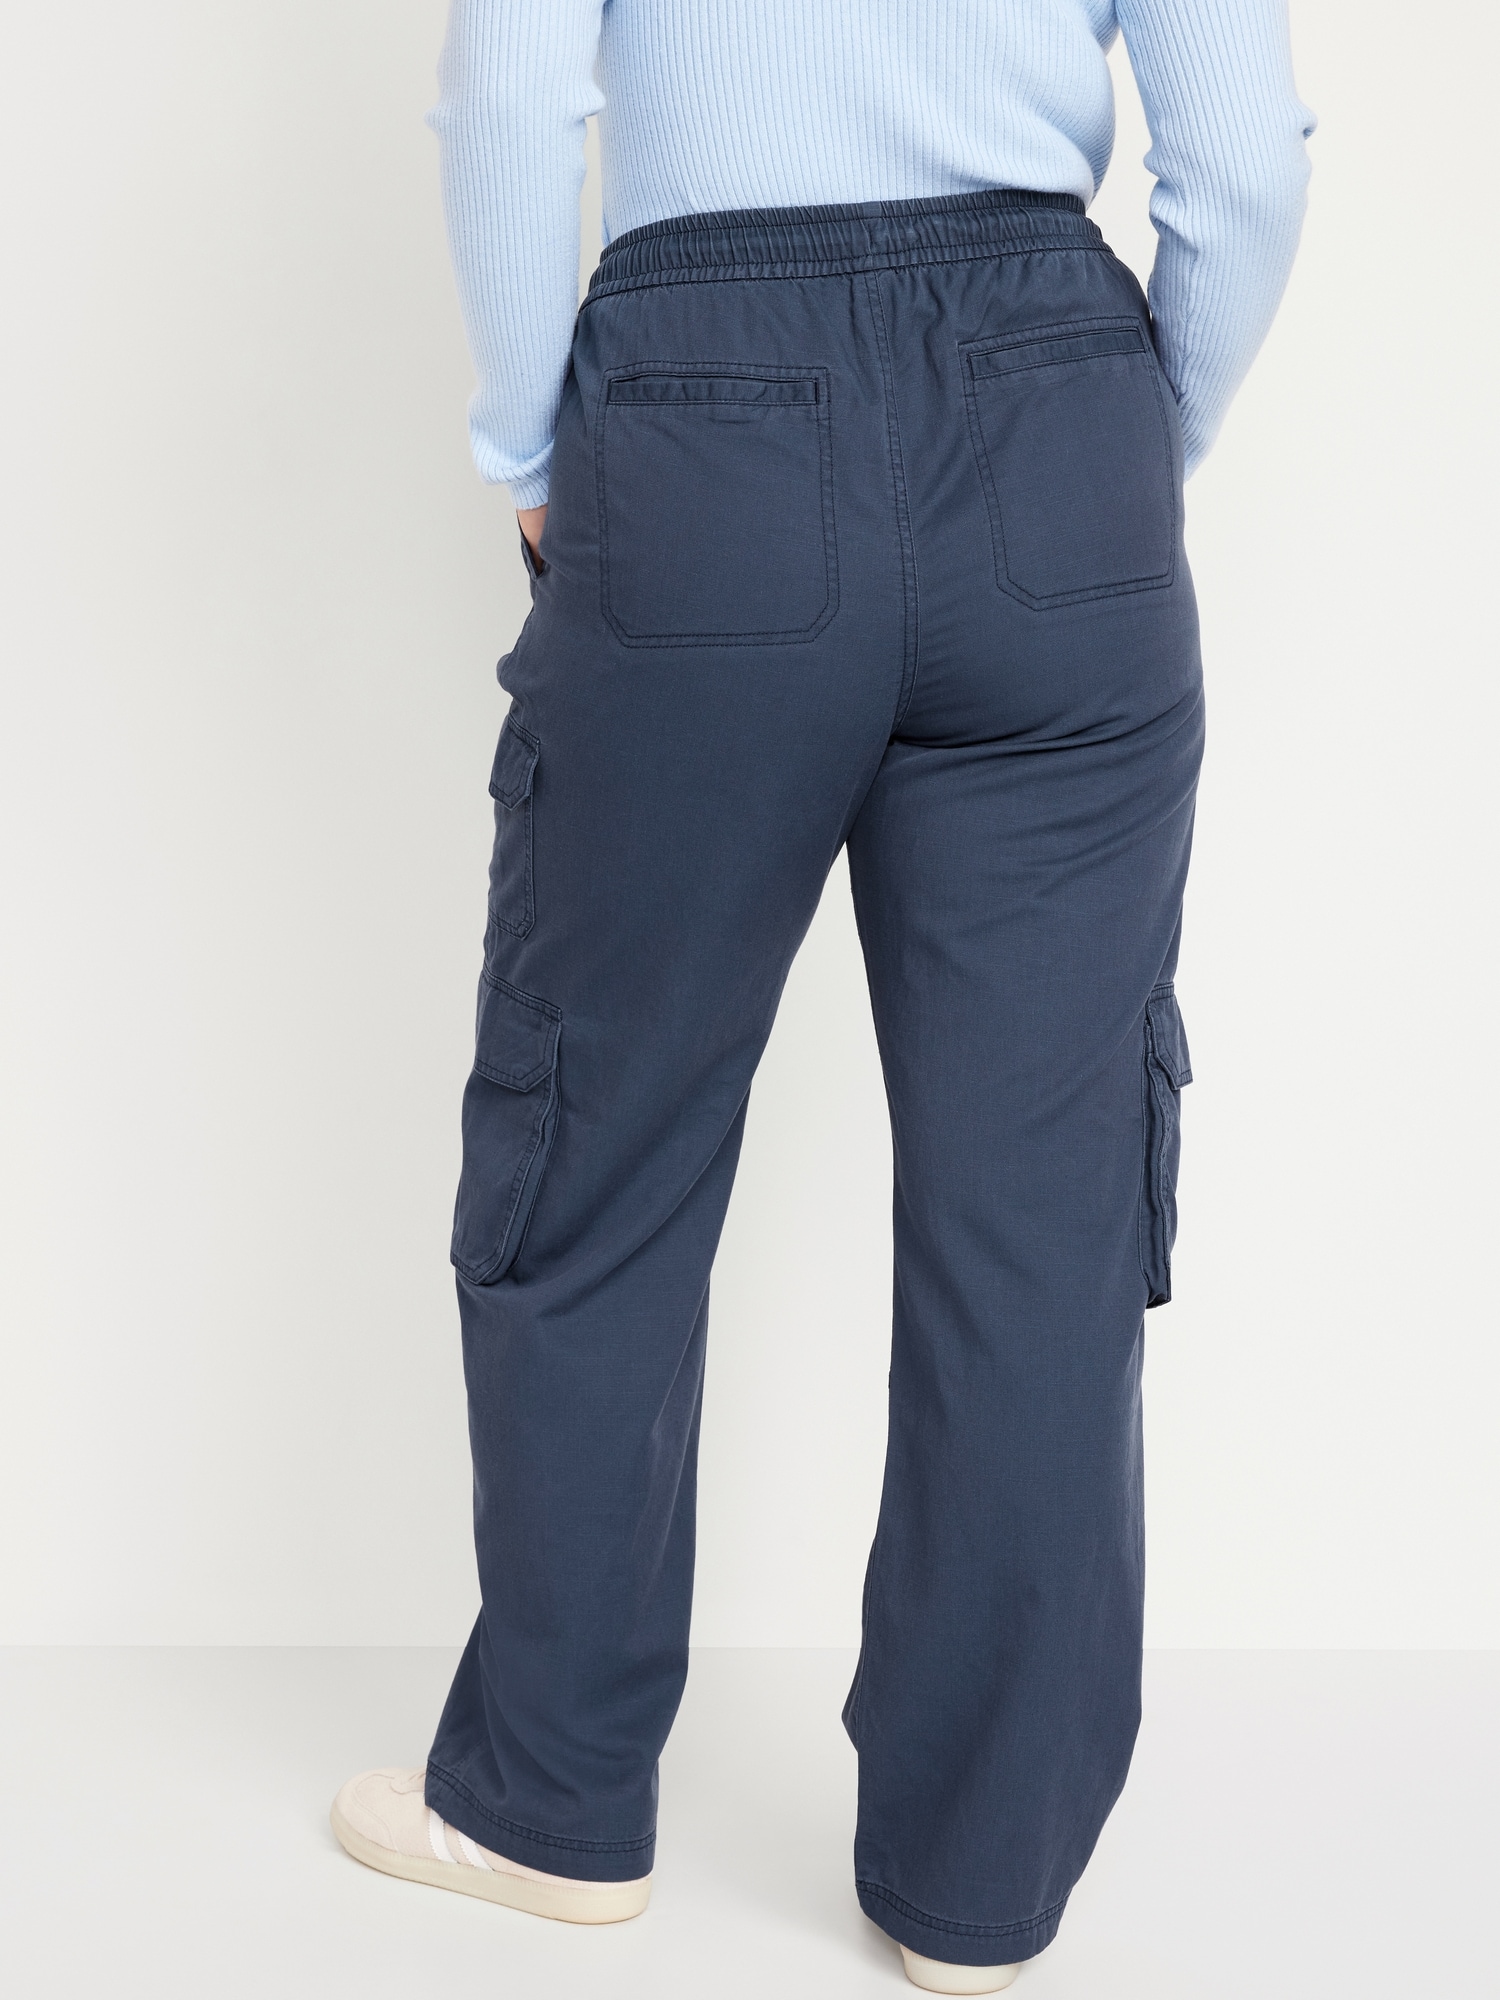 Mid-Rise Cargo Pants